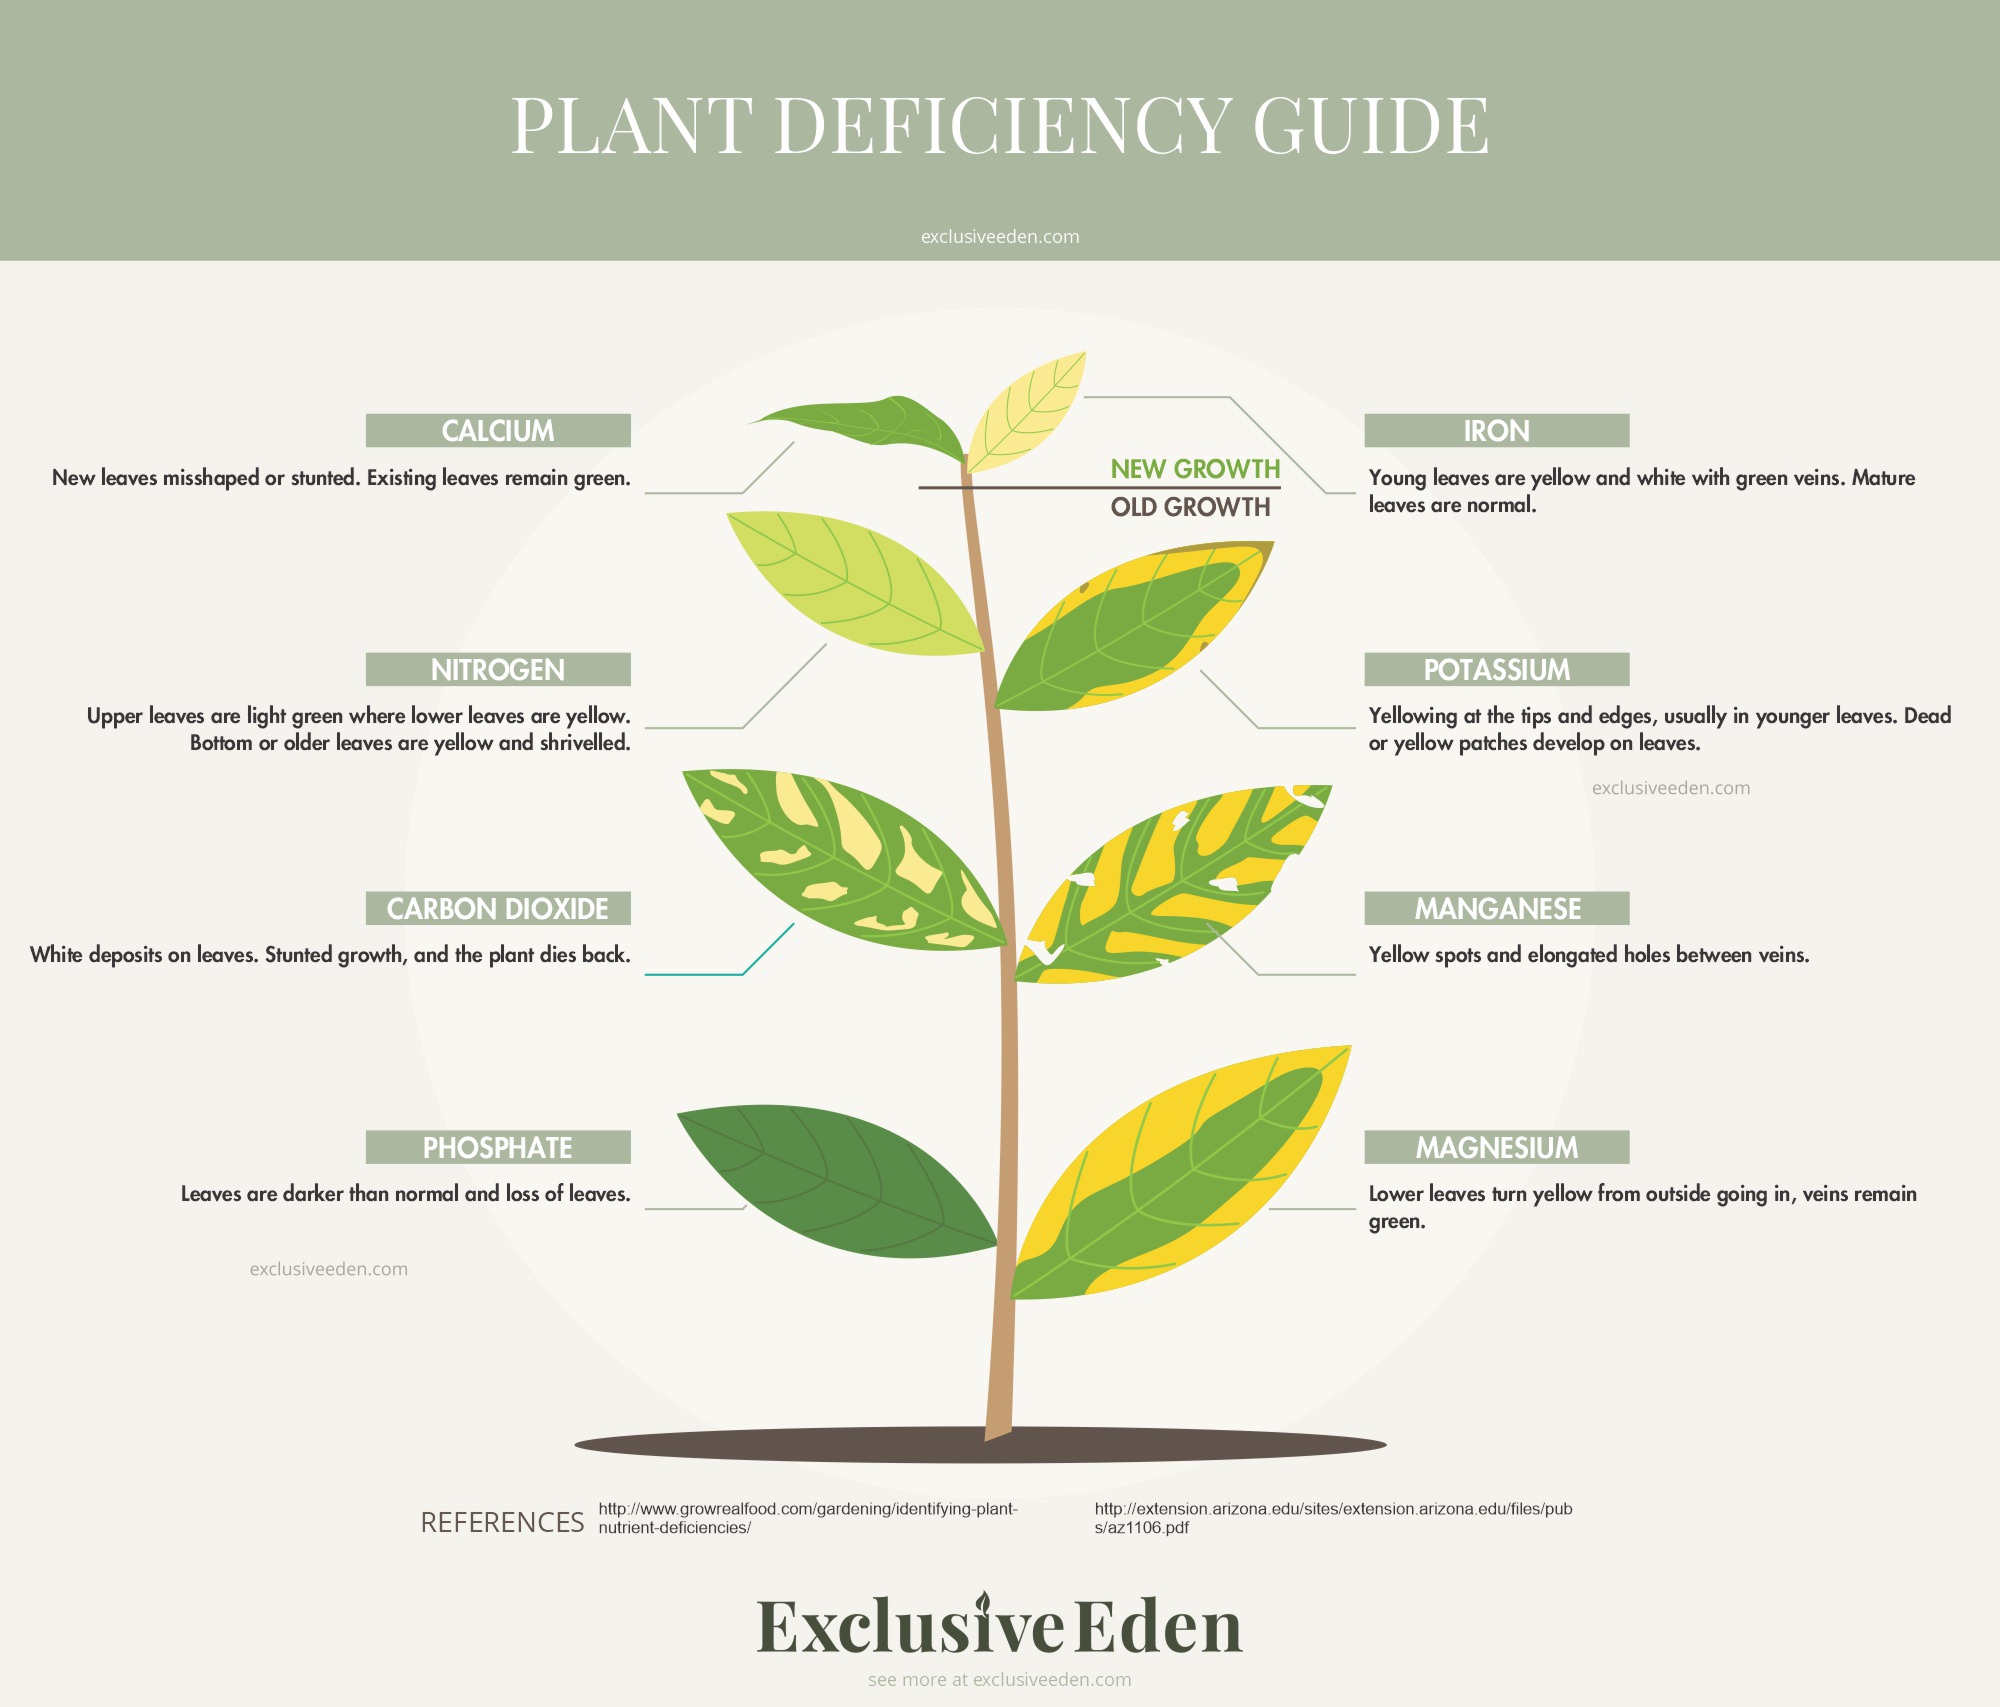 Simple illustrated guide to understanding common plant deficiencies.